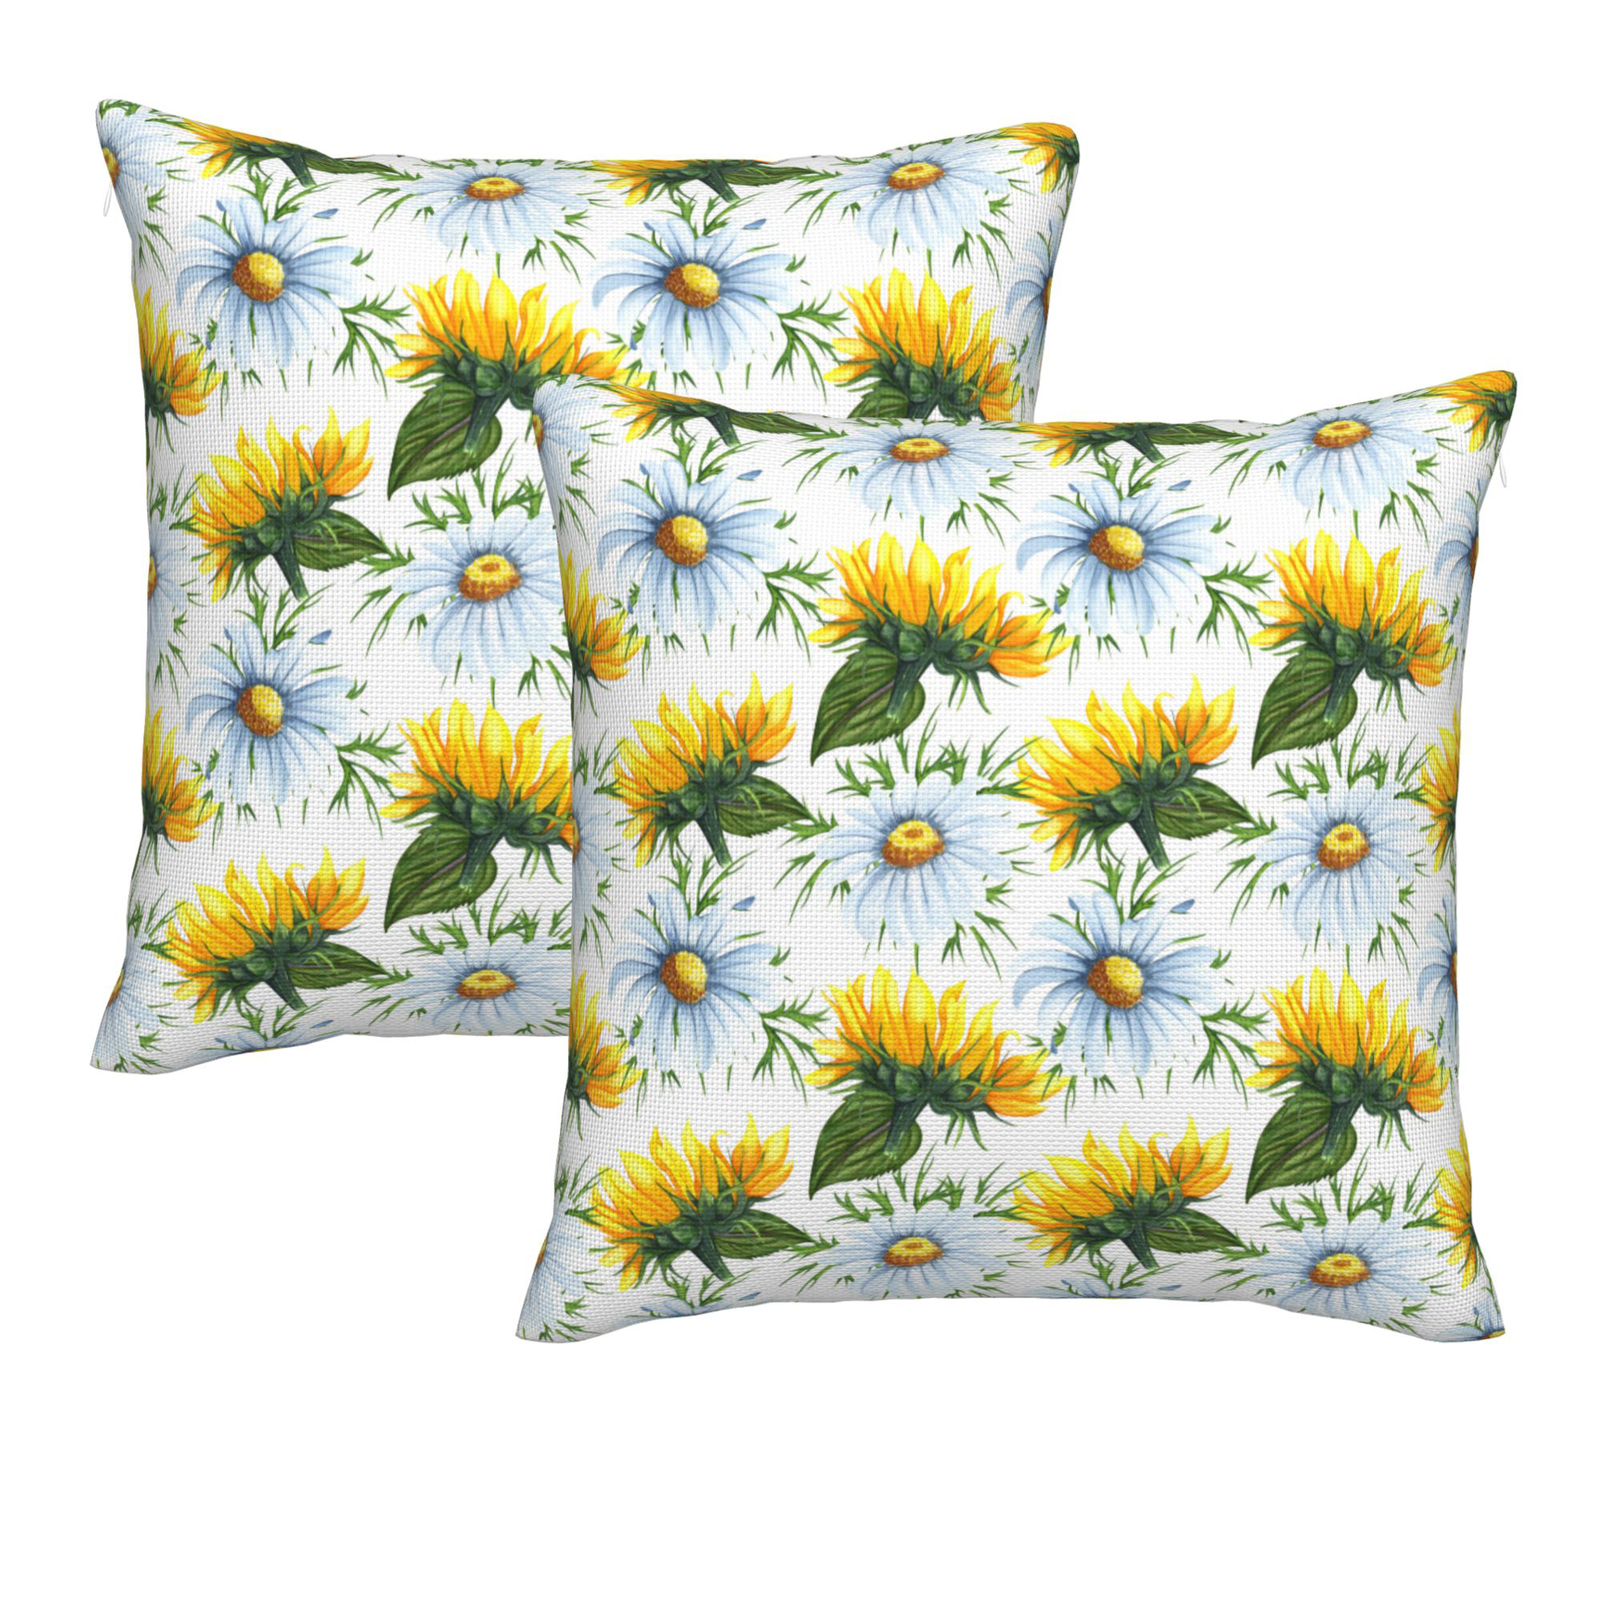 Primary image for Decorative Sunflower throw pillow cover floral pillow cases square 18X18 linen  